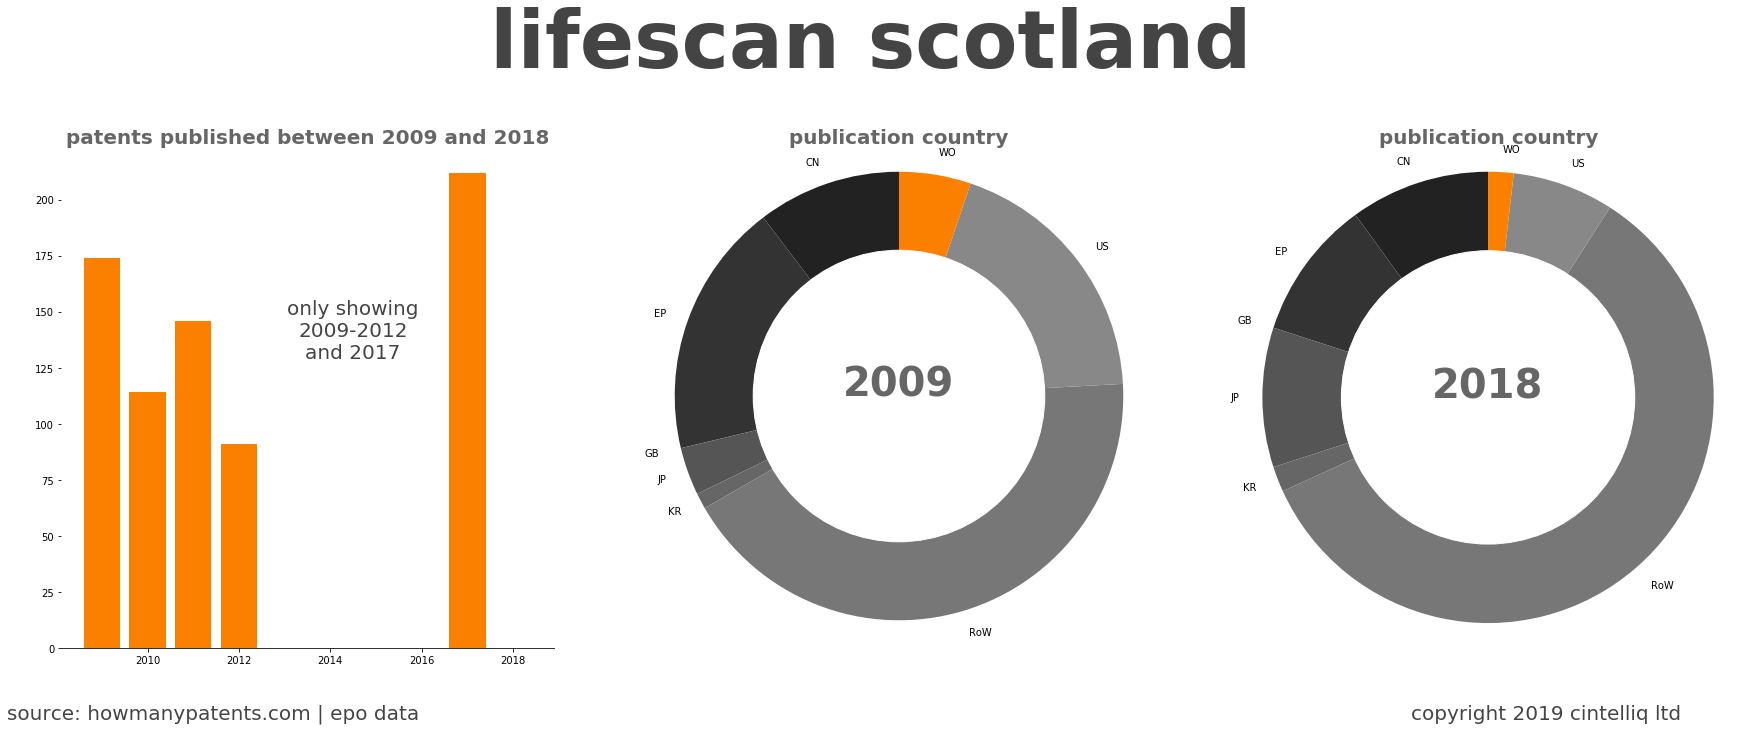 summary of patents for Lifescan Scotland